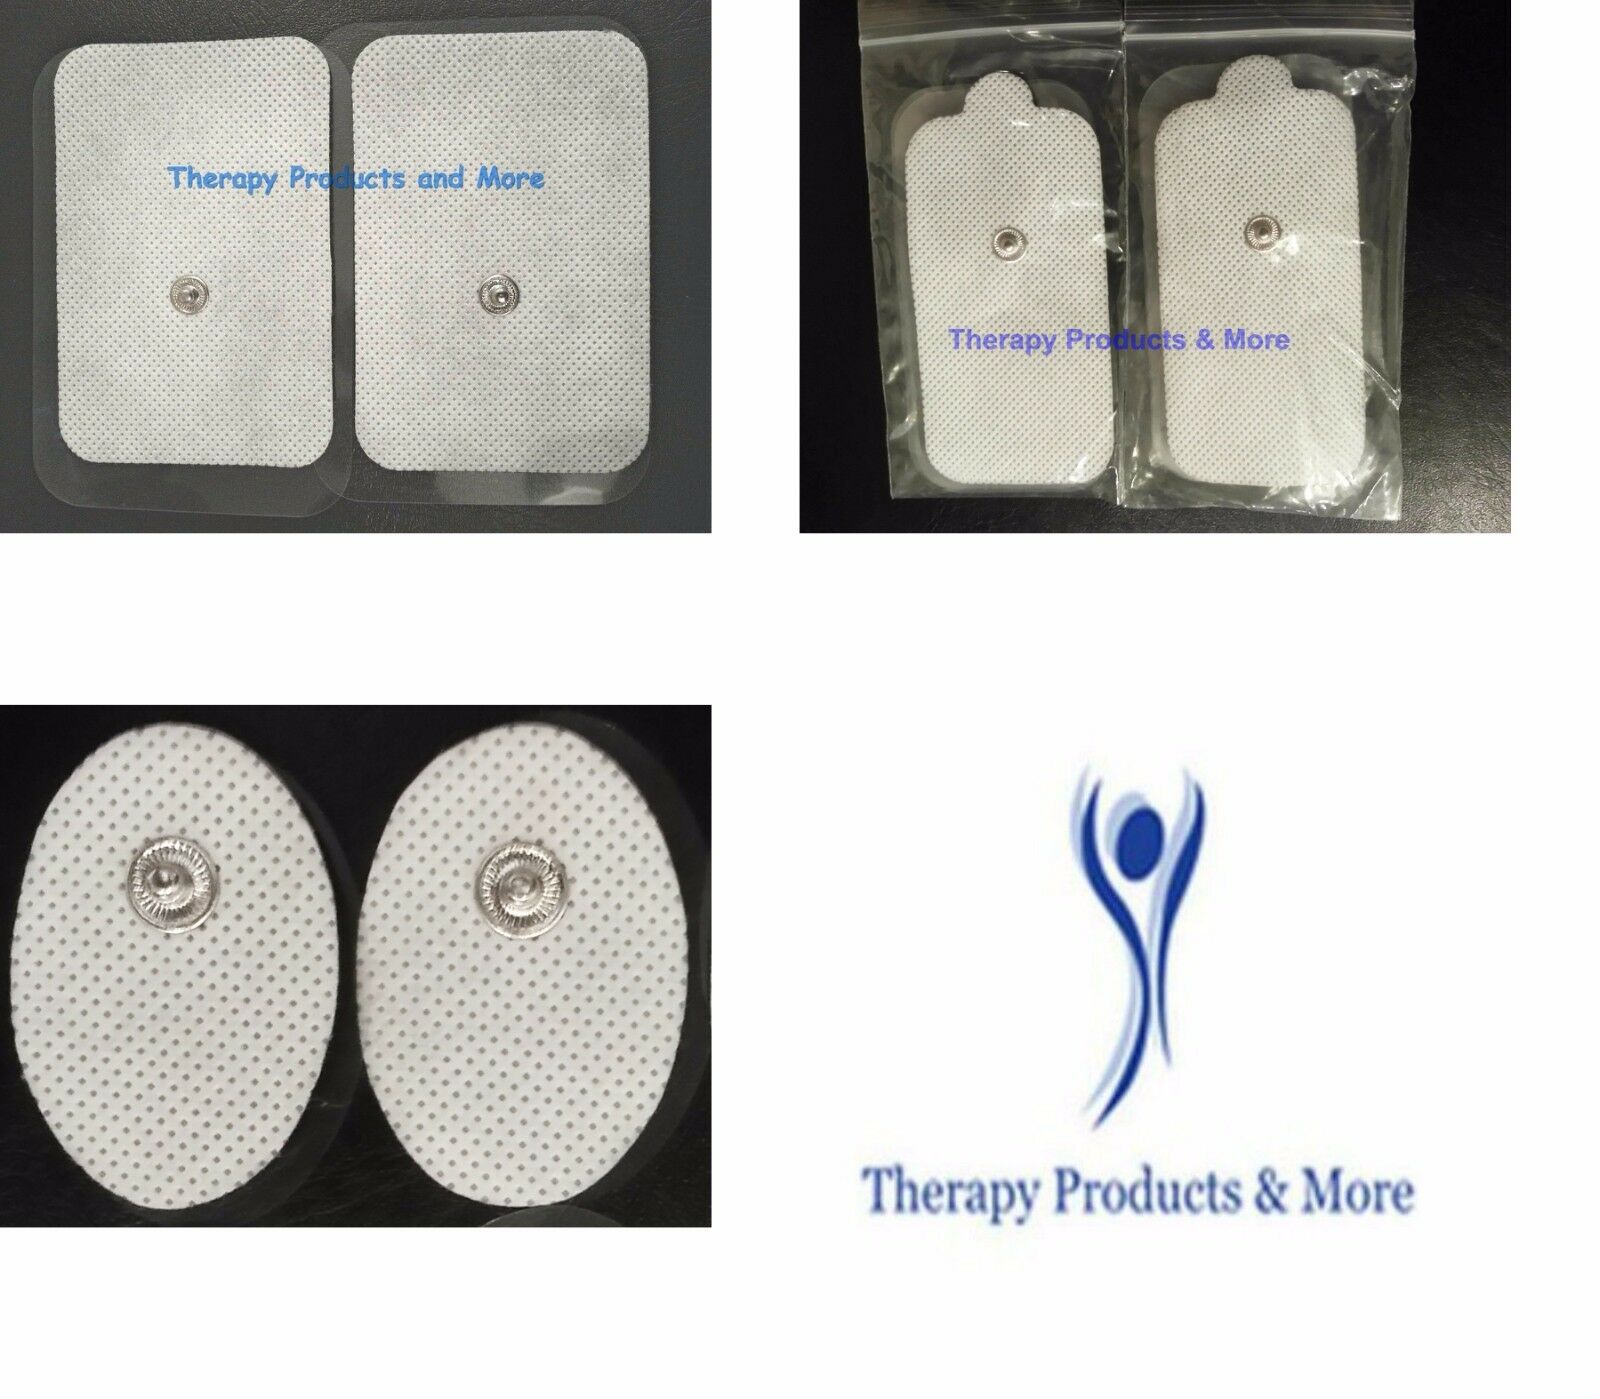 + Bonus Massage Adhesive Pads For Aurawave Perfect T.e.n.s. By Tony Little